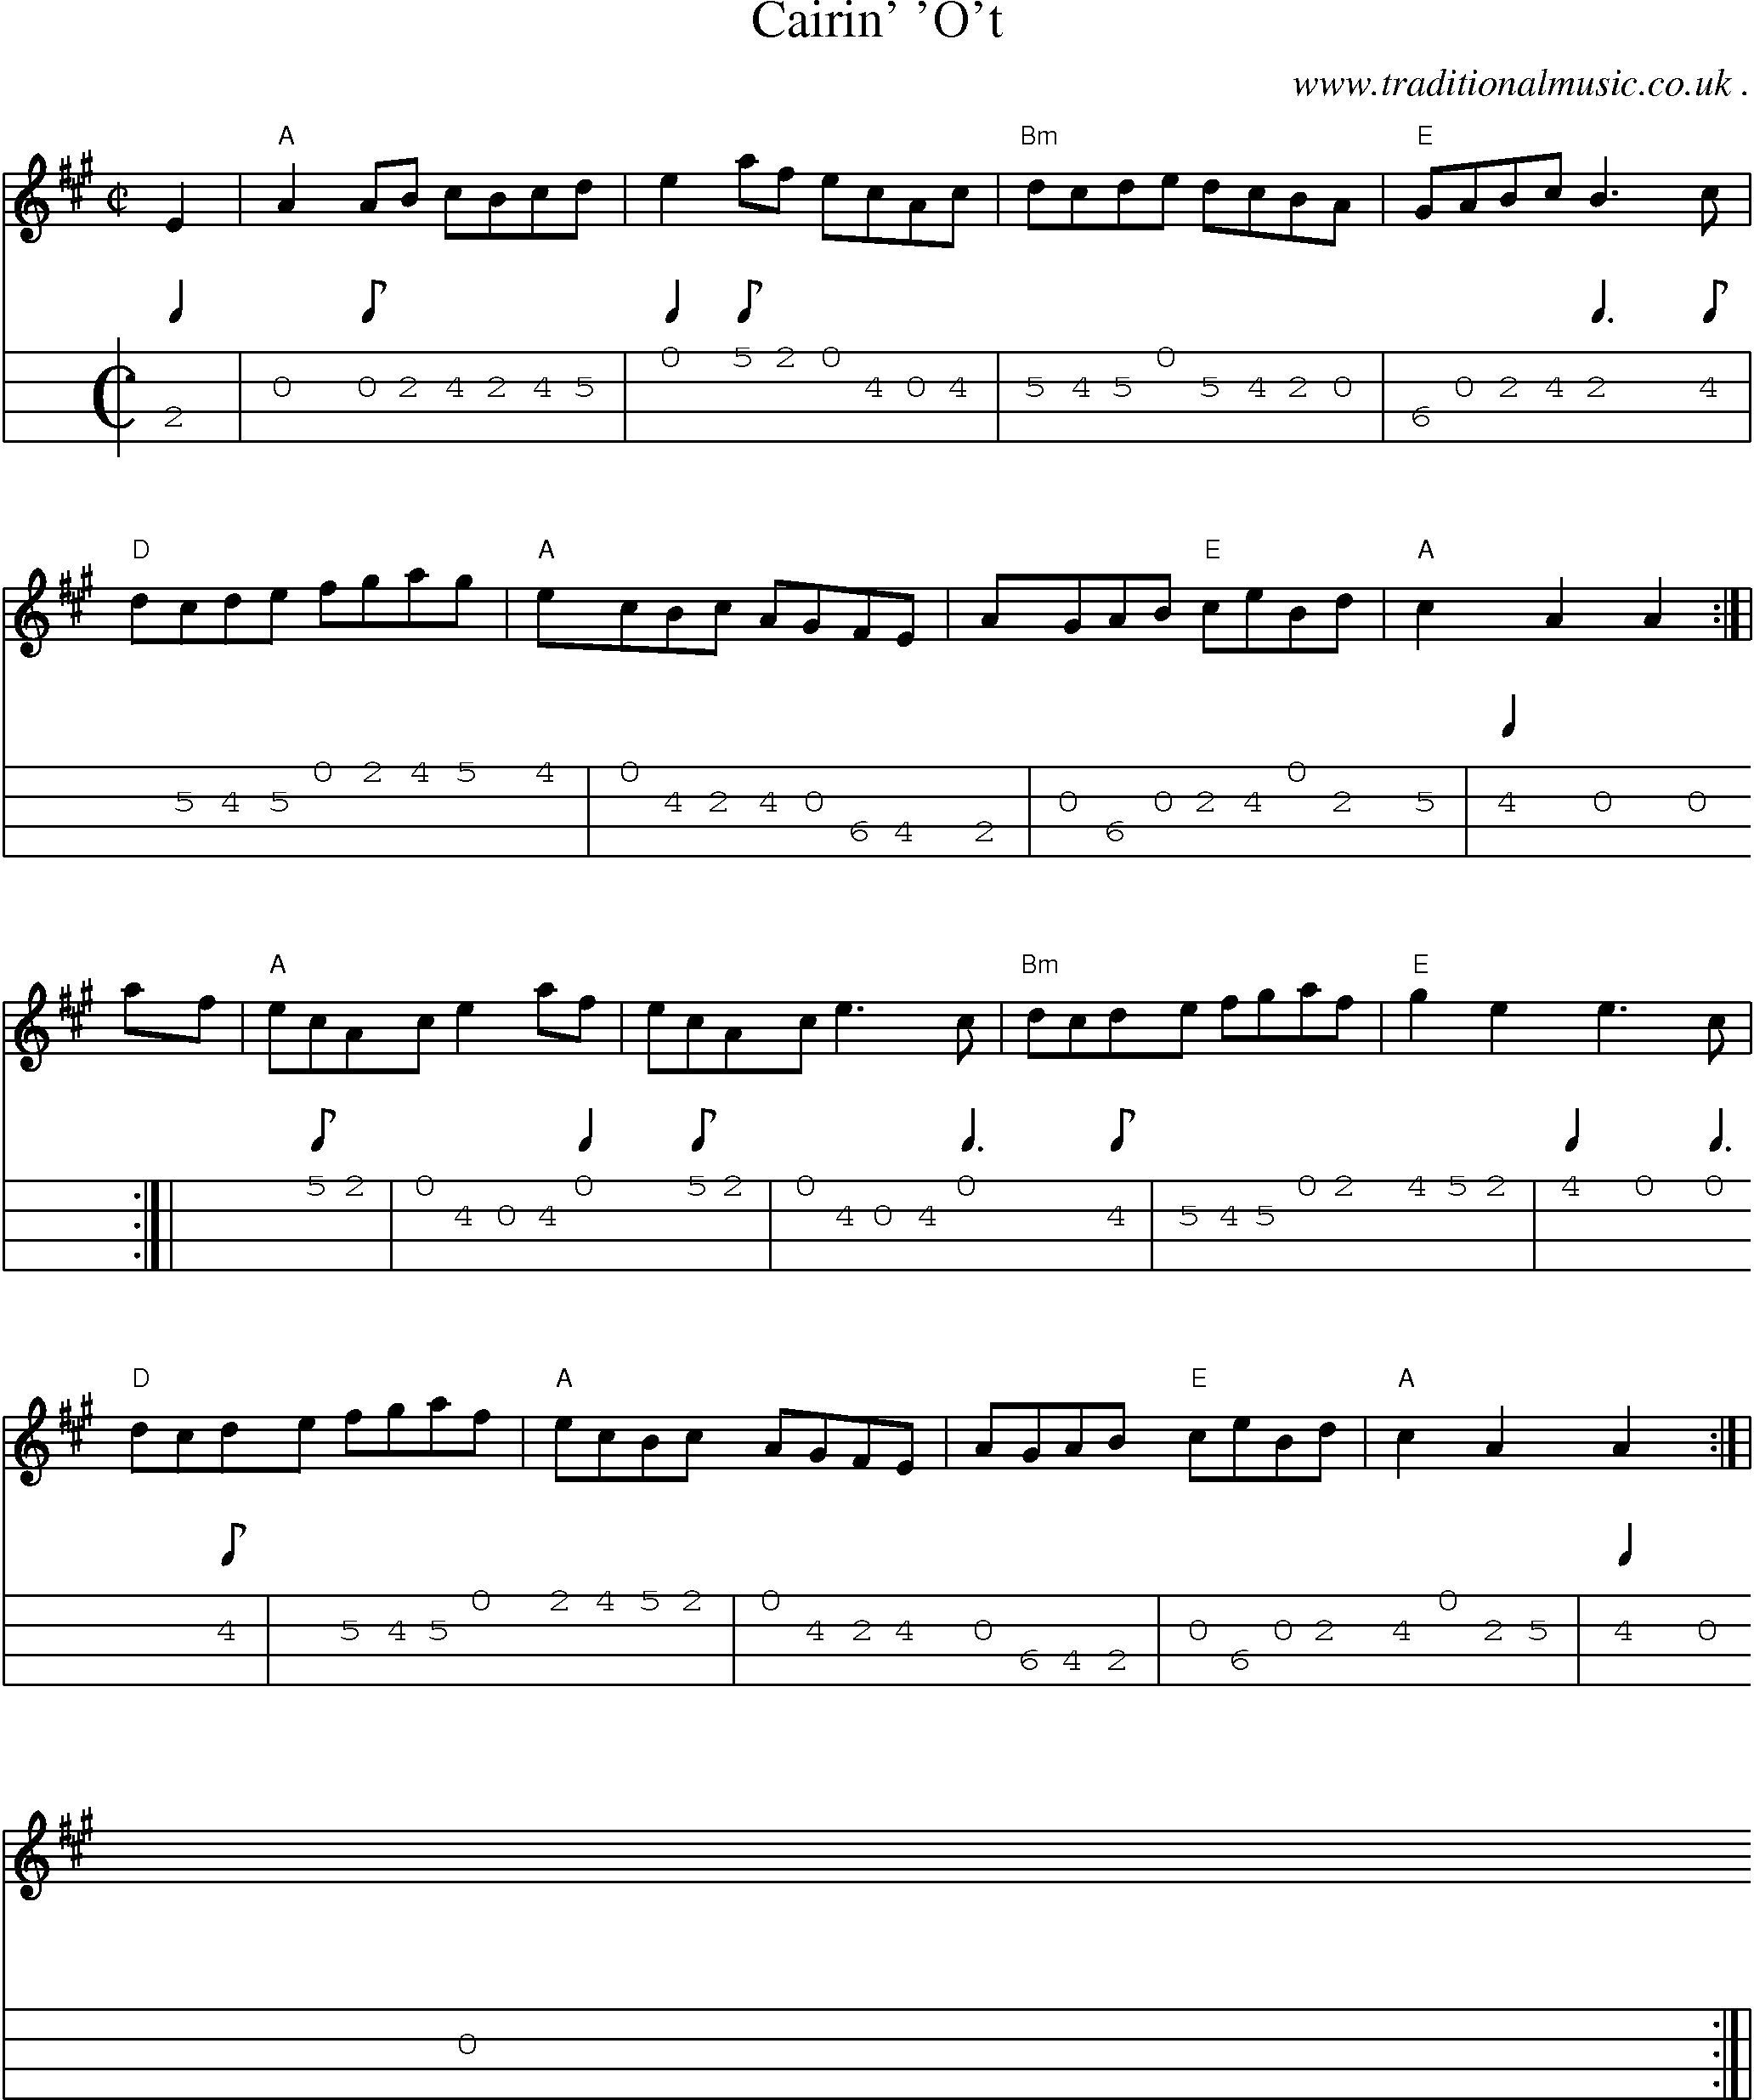 Sheet-music  score, Chords and Mandolin Tabs for Cairin Ot